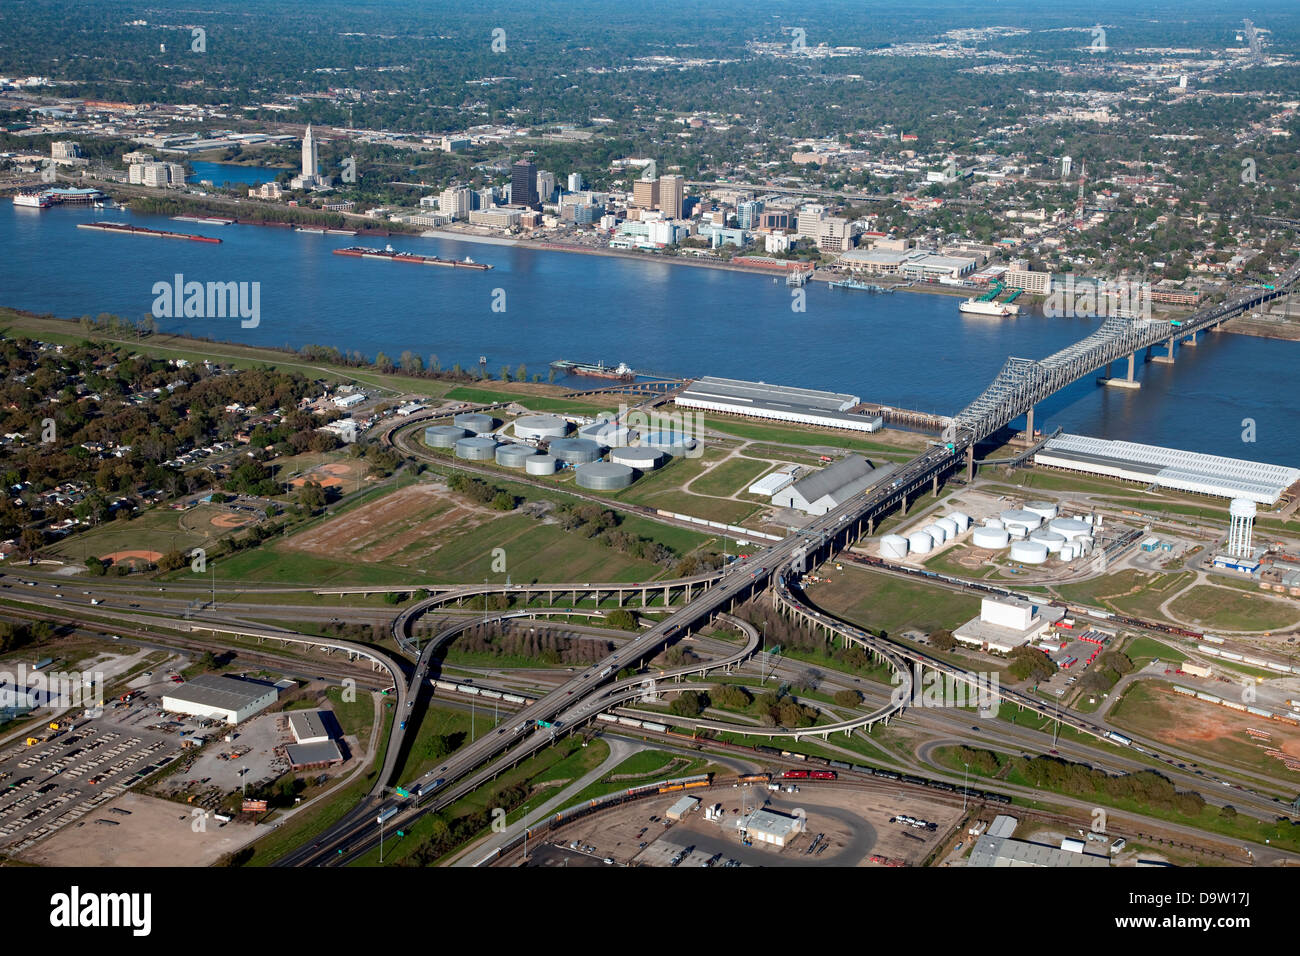 Aerial of Baton Rouge, Louisiana with an I-10 Interchange in the foreground Stock Photo